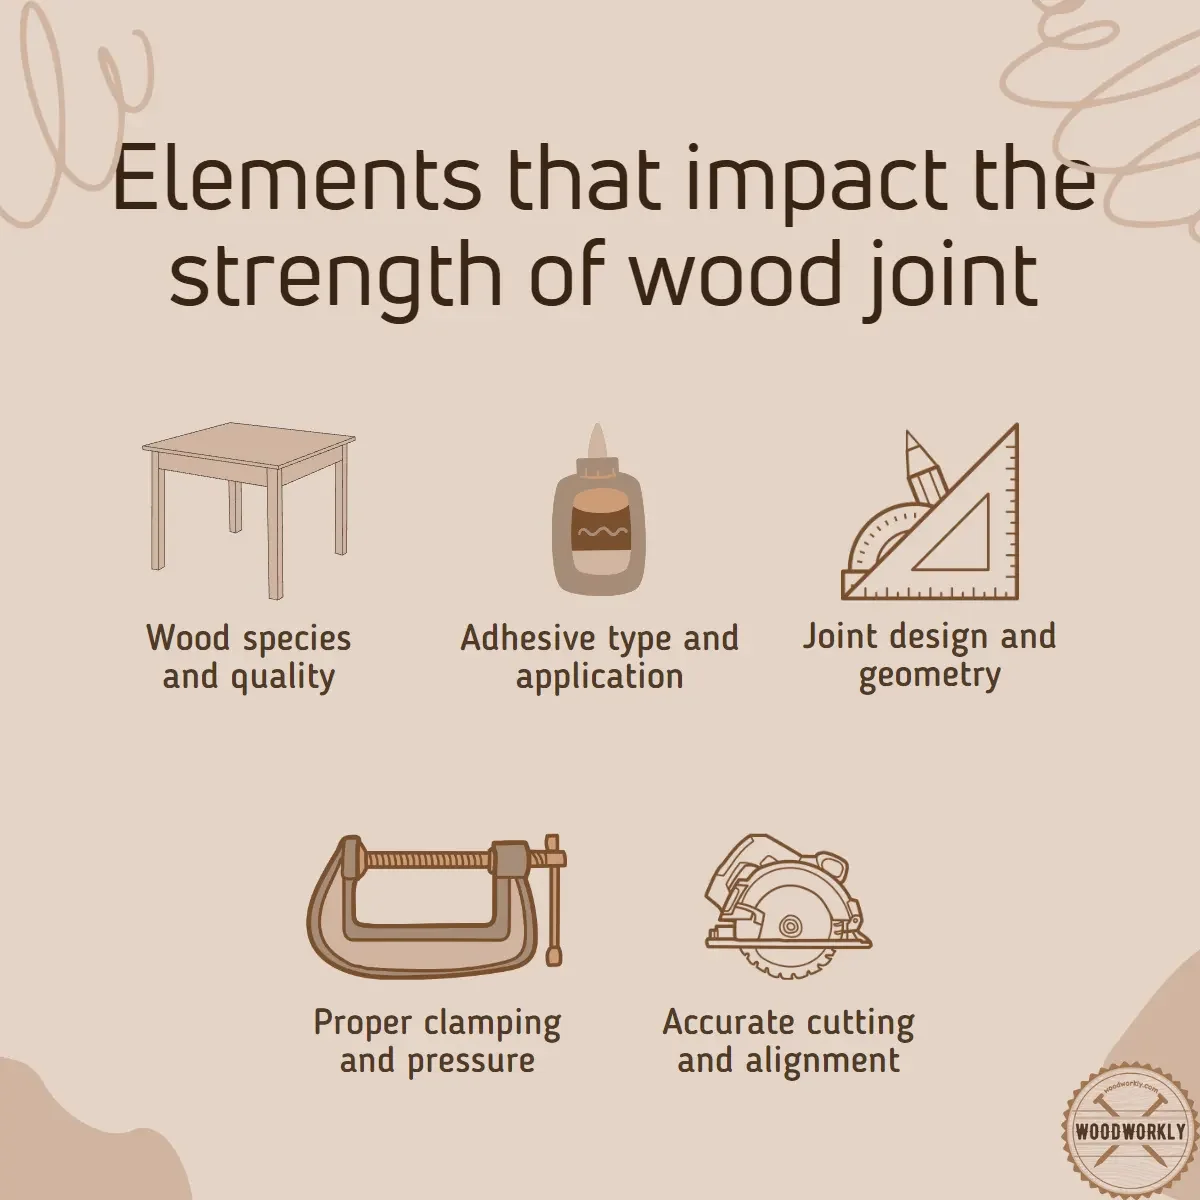 Elements that impact the strength of wood joint